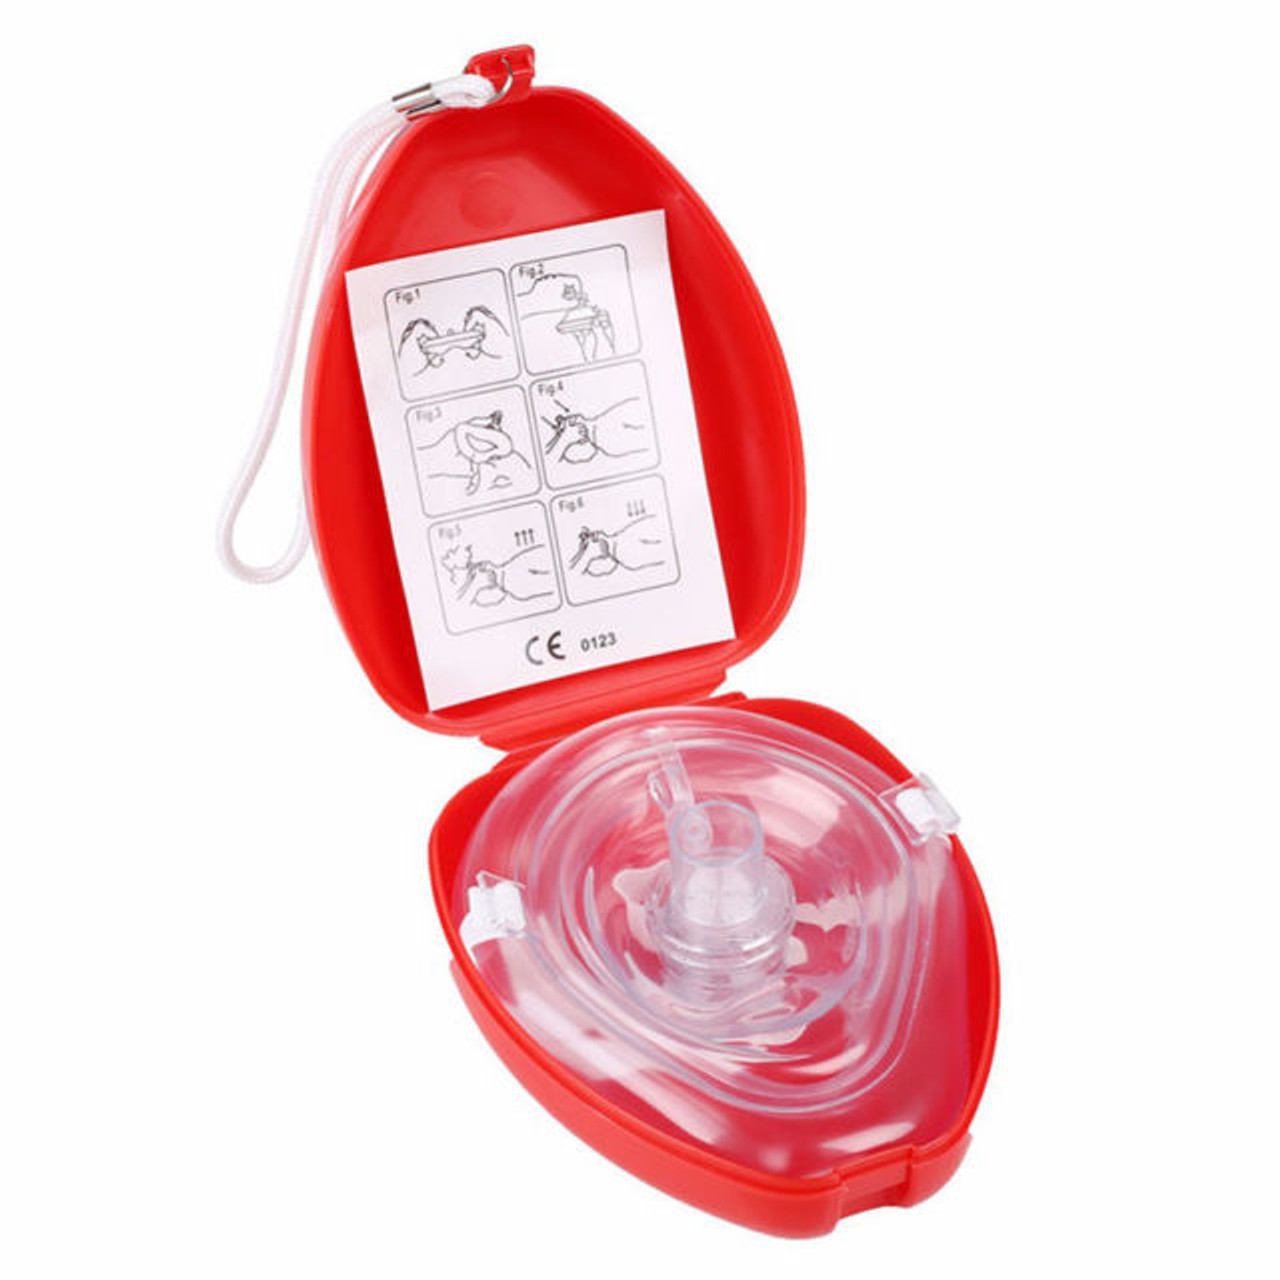 CPR Pocket Face Mask - Jax First Aid